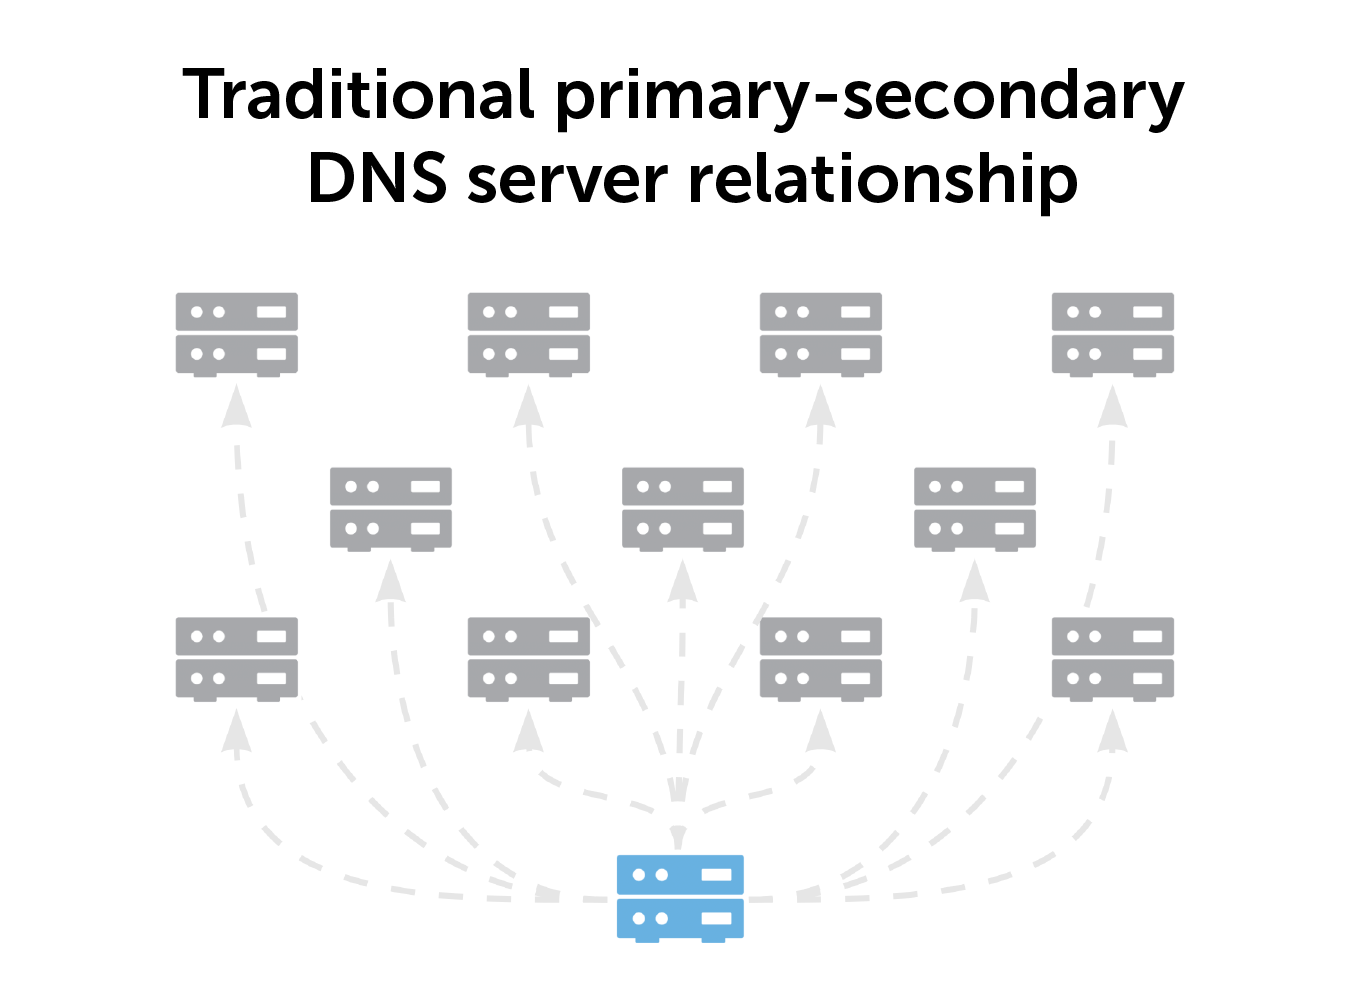 Traditional primary-secondary DNS relationship